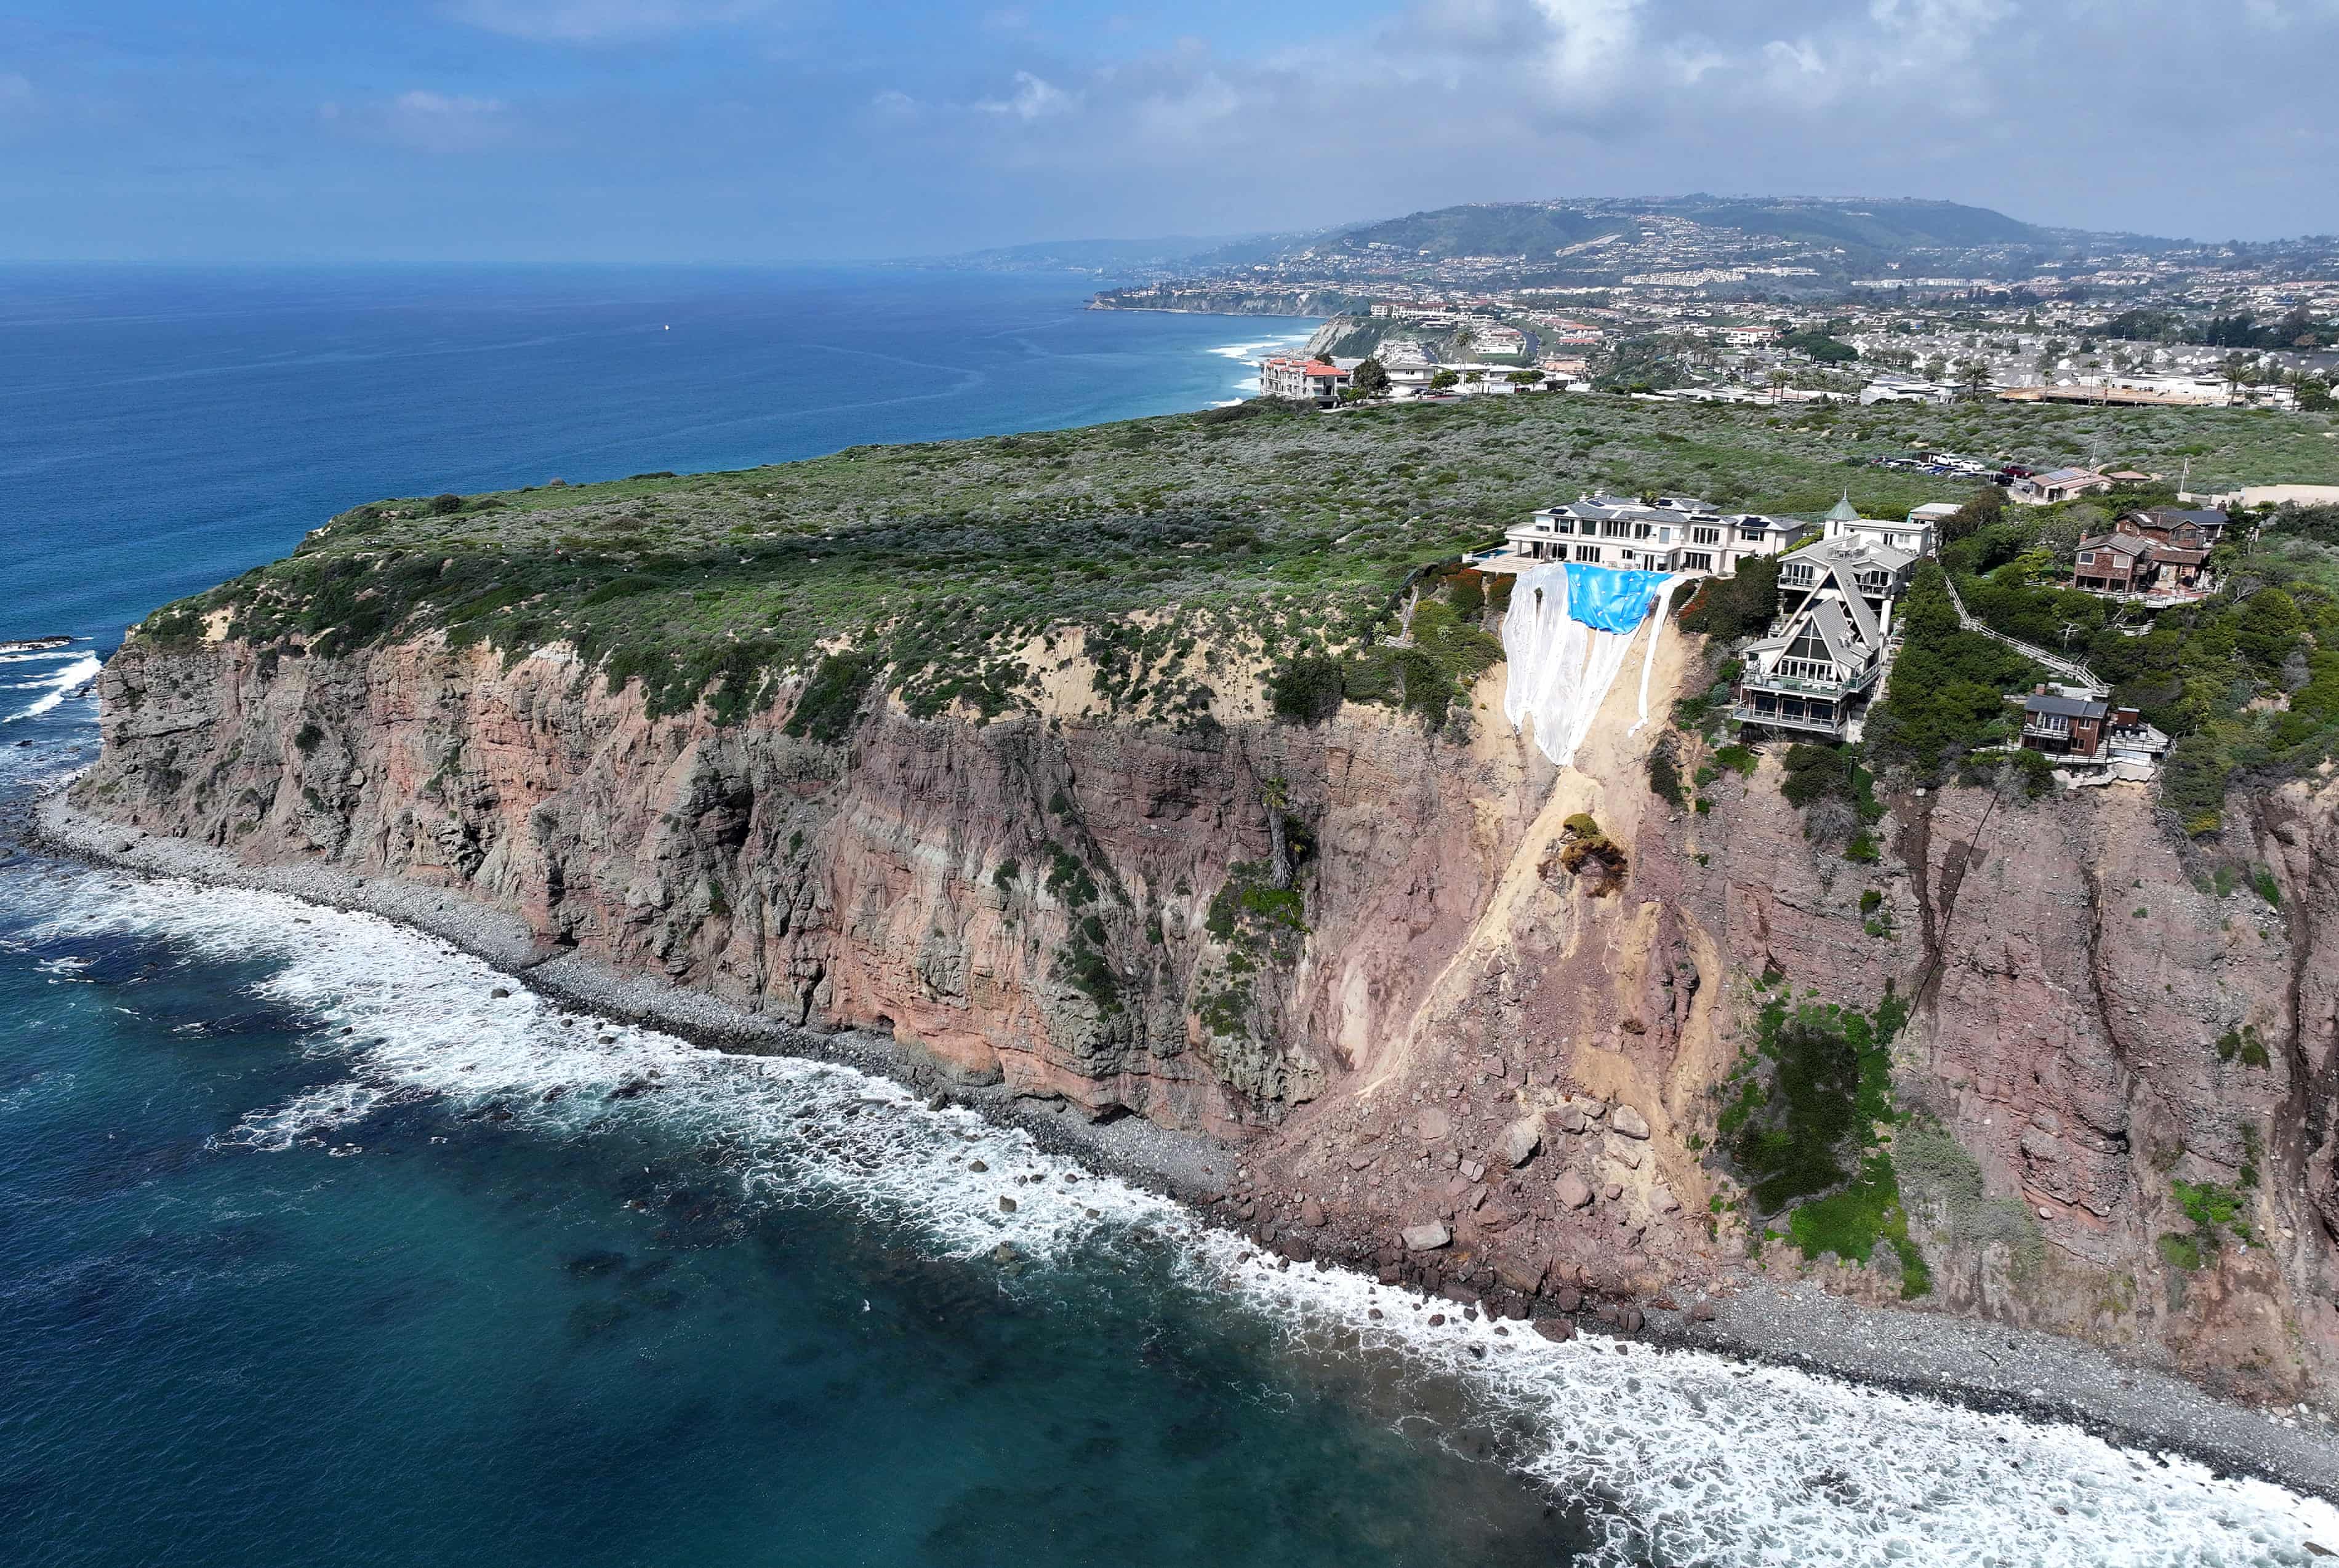 On the brink: California’s luxe clifftop mansions in peril after record rain (theguardian.com)